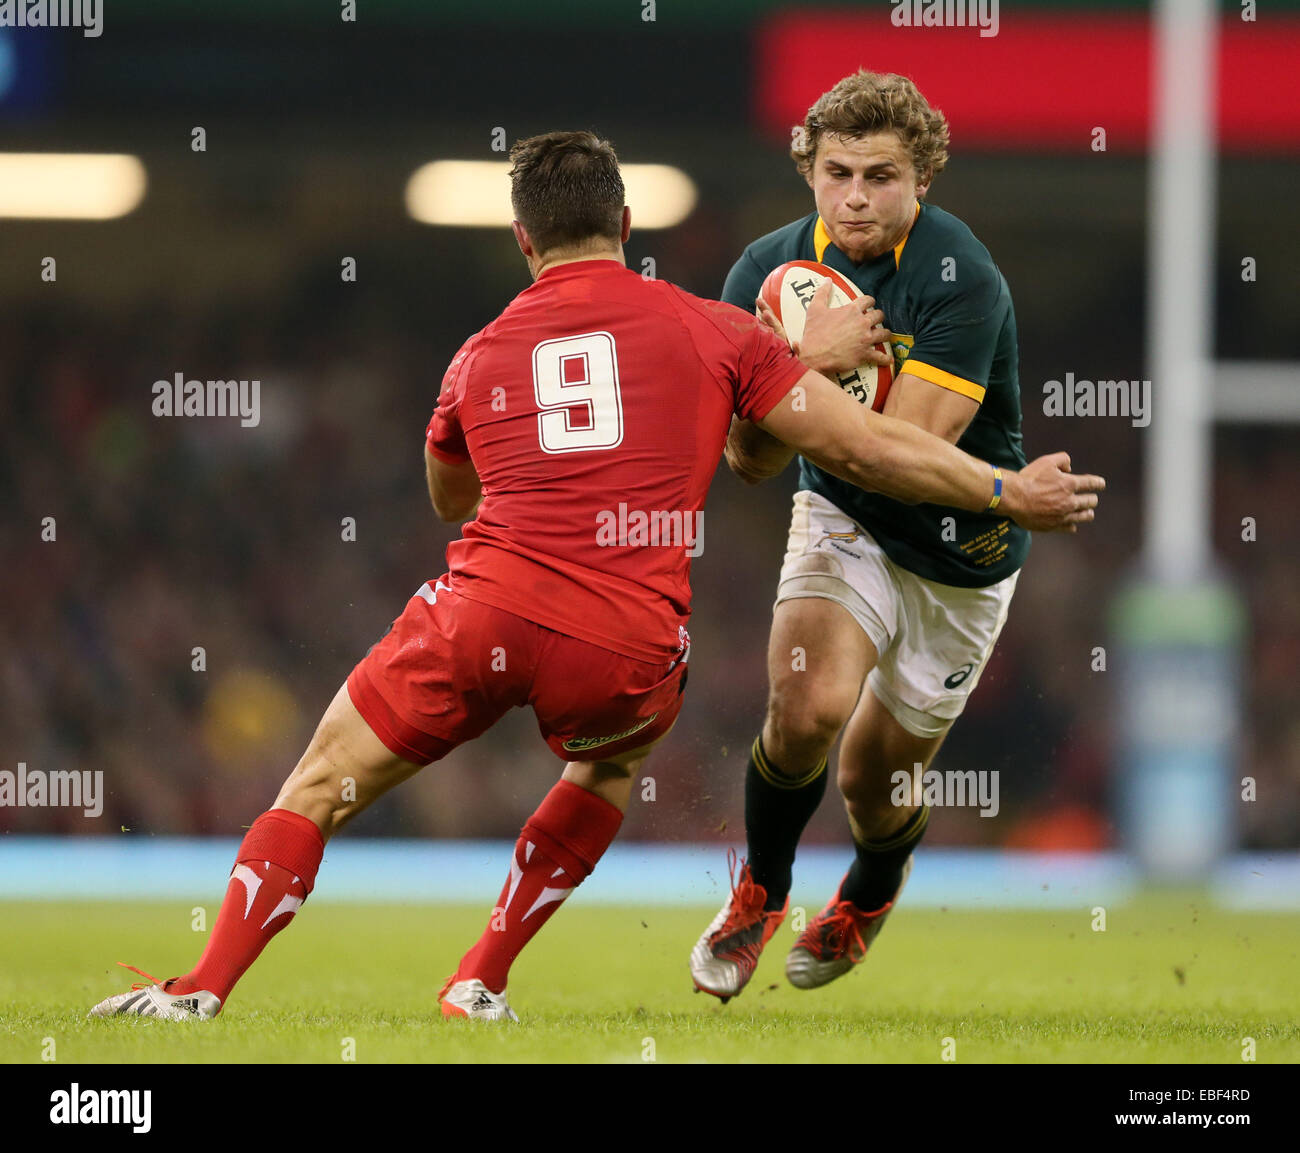 Cardiff, UK. 29th Nov, 2014. Pat Lambie of South Africa tackled by Rhys Webb of Wales - Autumn Internationals - Wales vs South Africa - Millennium Stadium - Cardiff - Wales - 29th November 2014 - Picture Simon Bellis/Sportimage. Credit:  csm/Alamy Live News Stock Photo